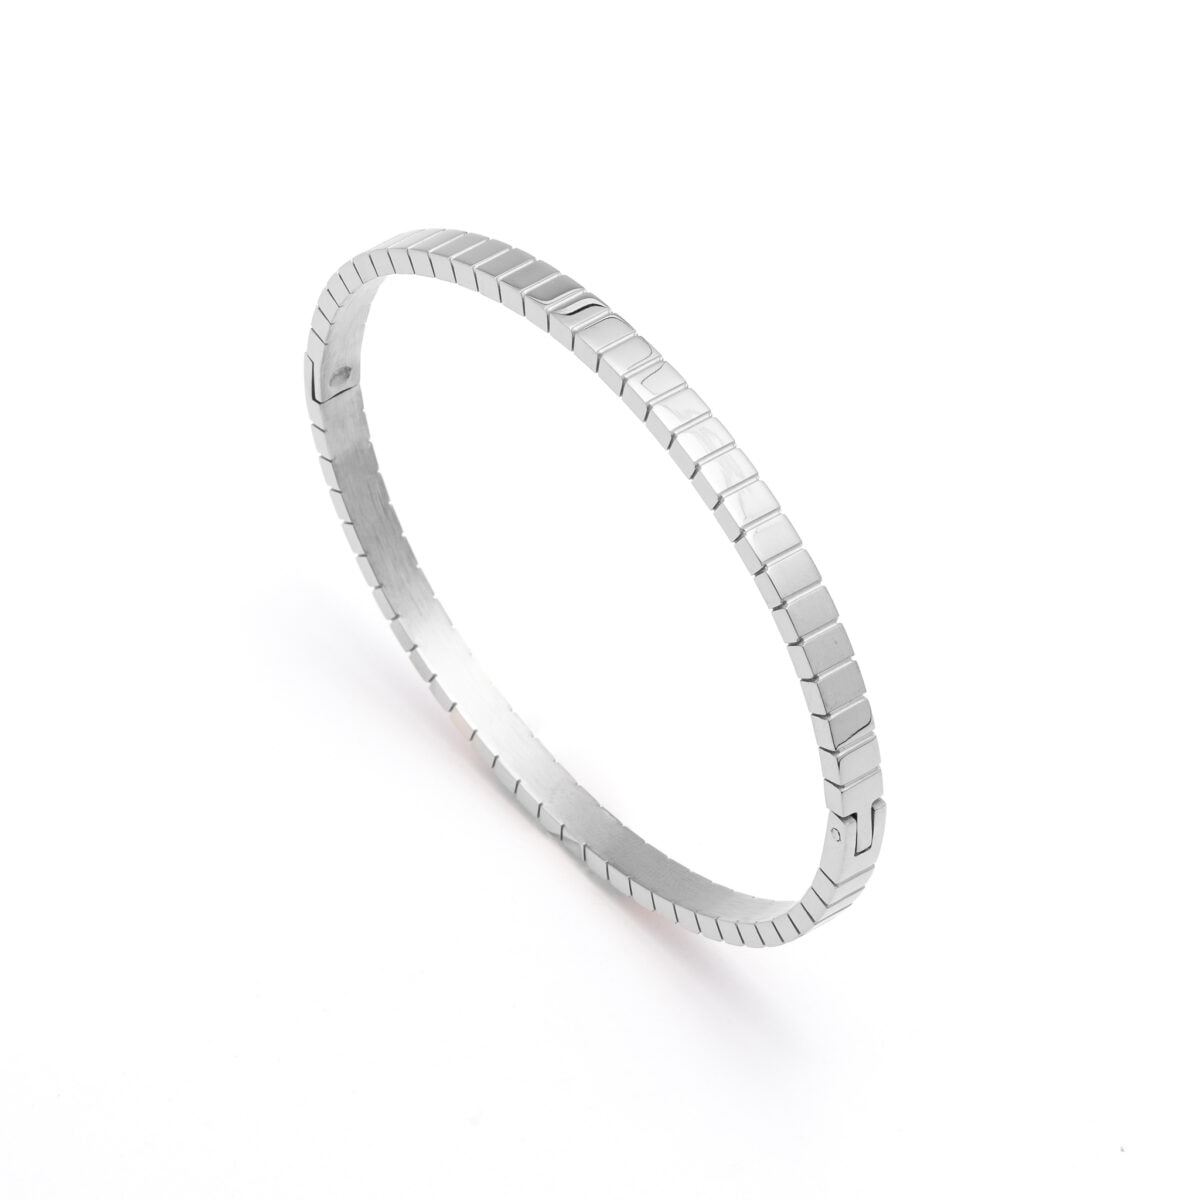 https://m.clubbella.co/product/ice-cube-silver-bangle/ Ice Cube Bangle Silver (1)